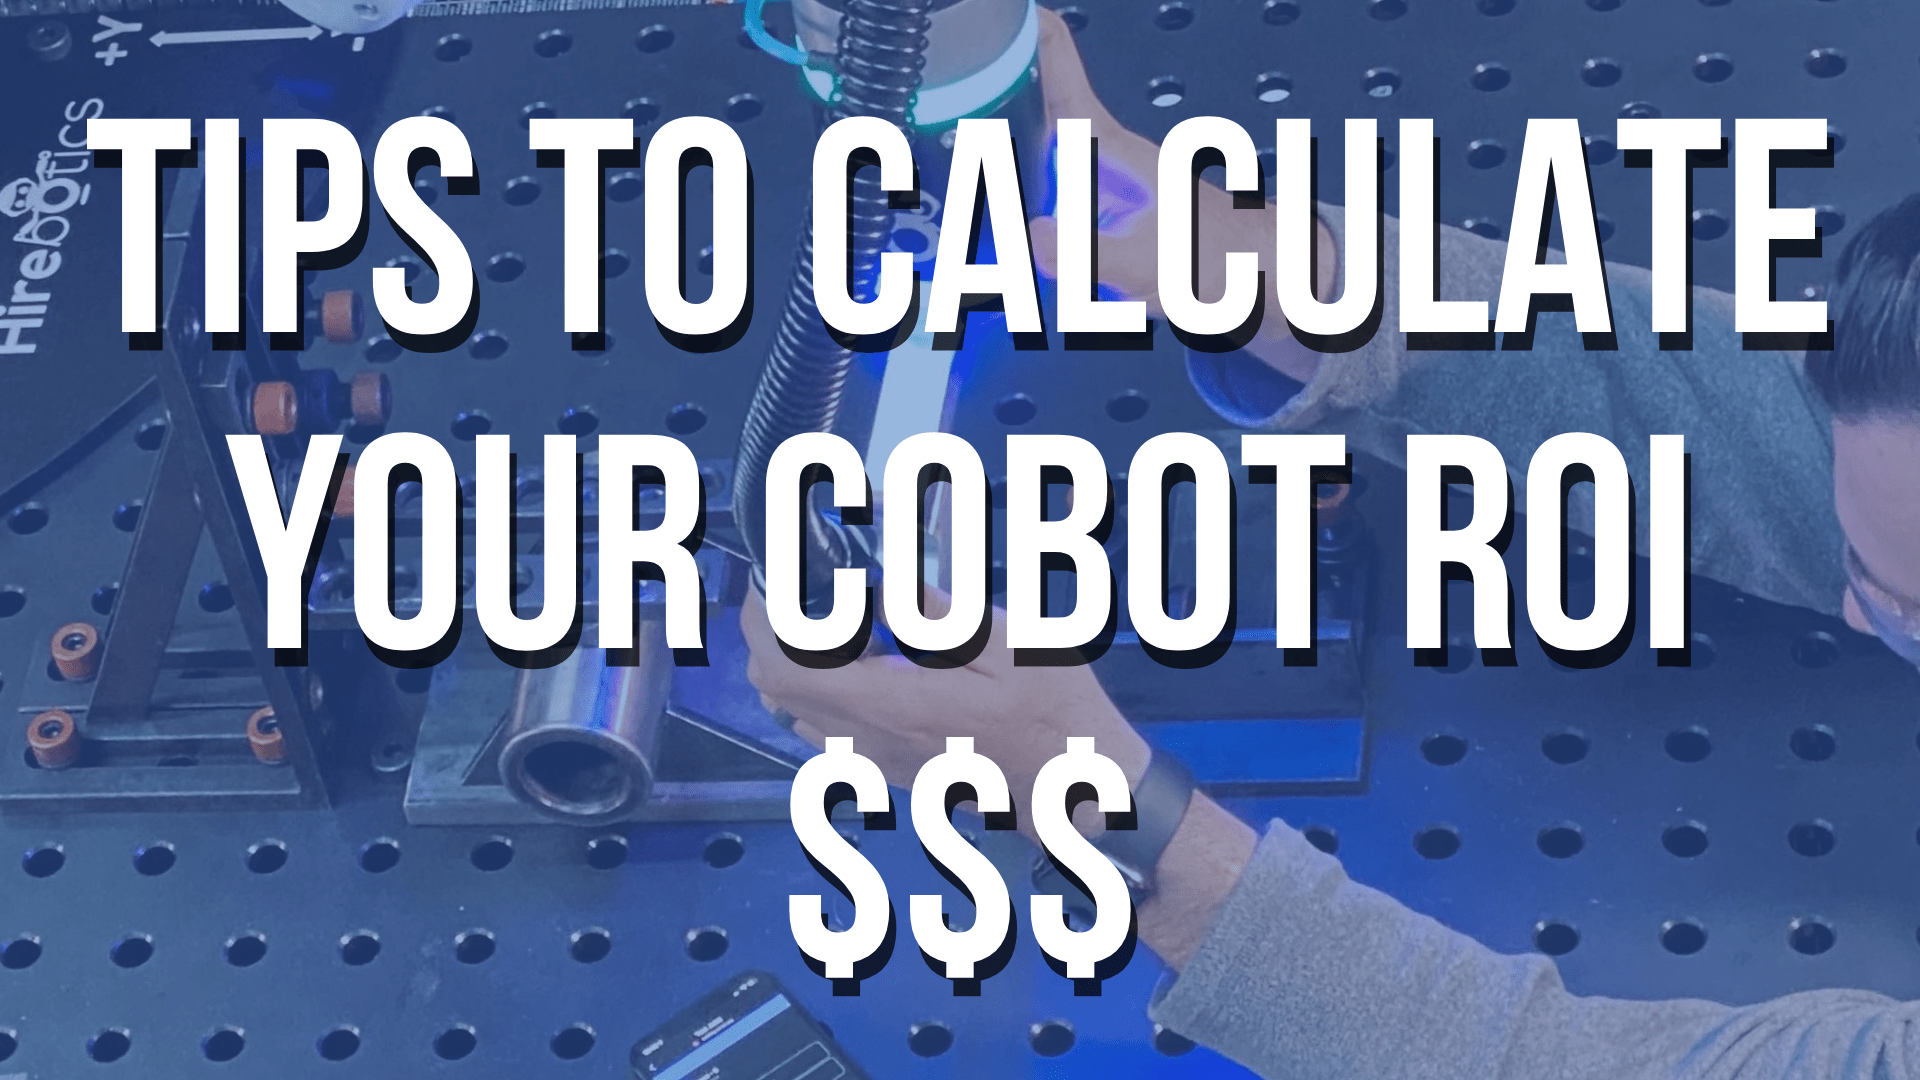 Tips To Calculate The ROI of Your First Welding Cobot